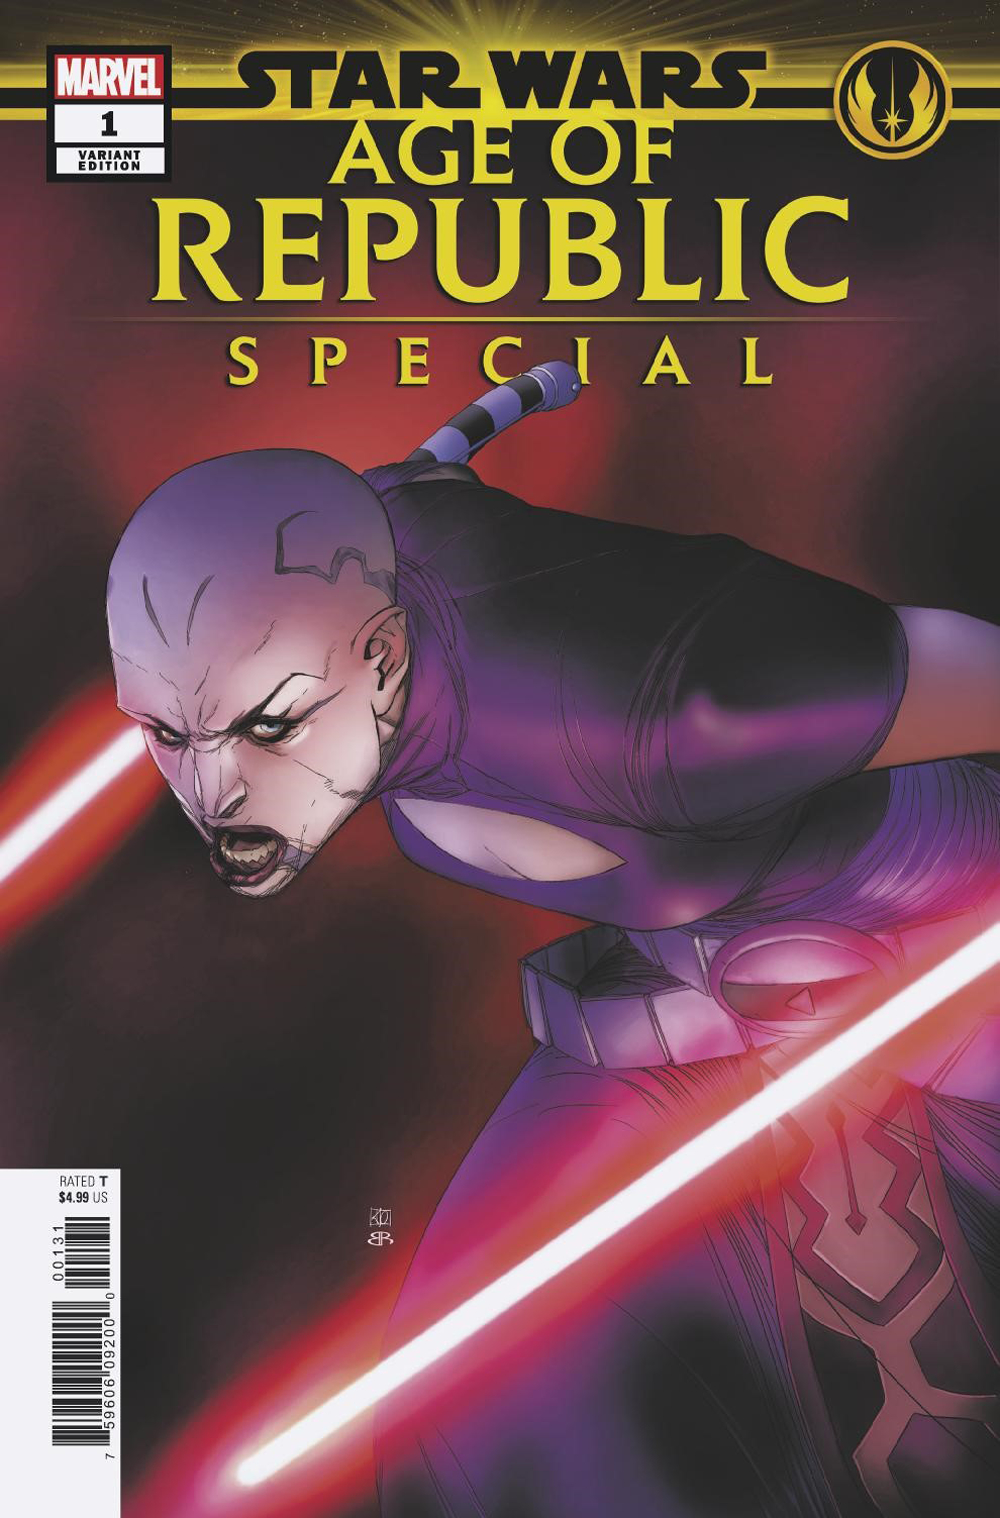 Age of Republic Special #1 (Khoi Pham Variant Cover) (16.01.2019)